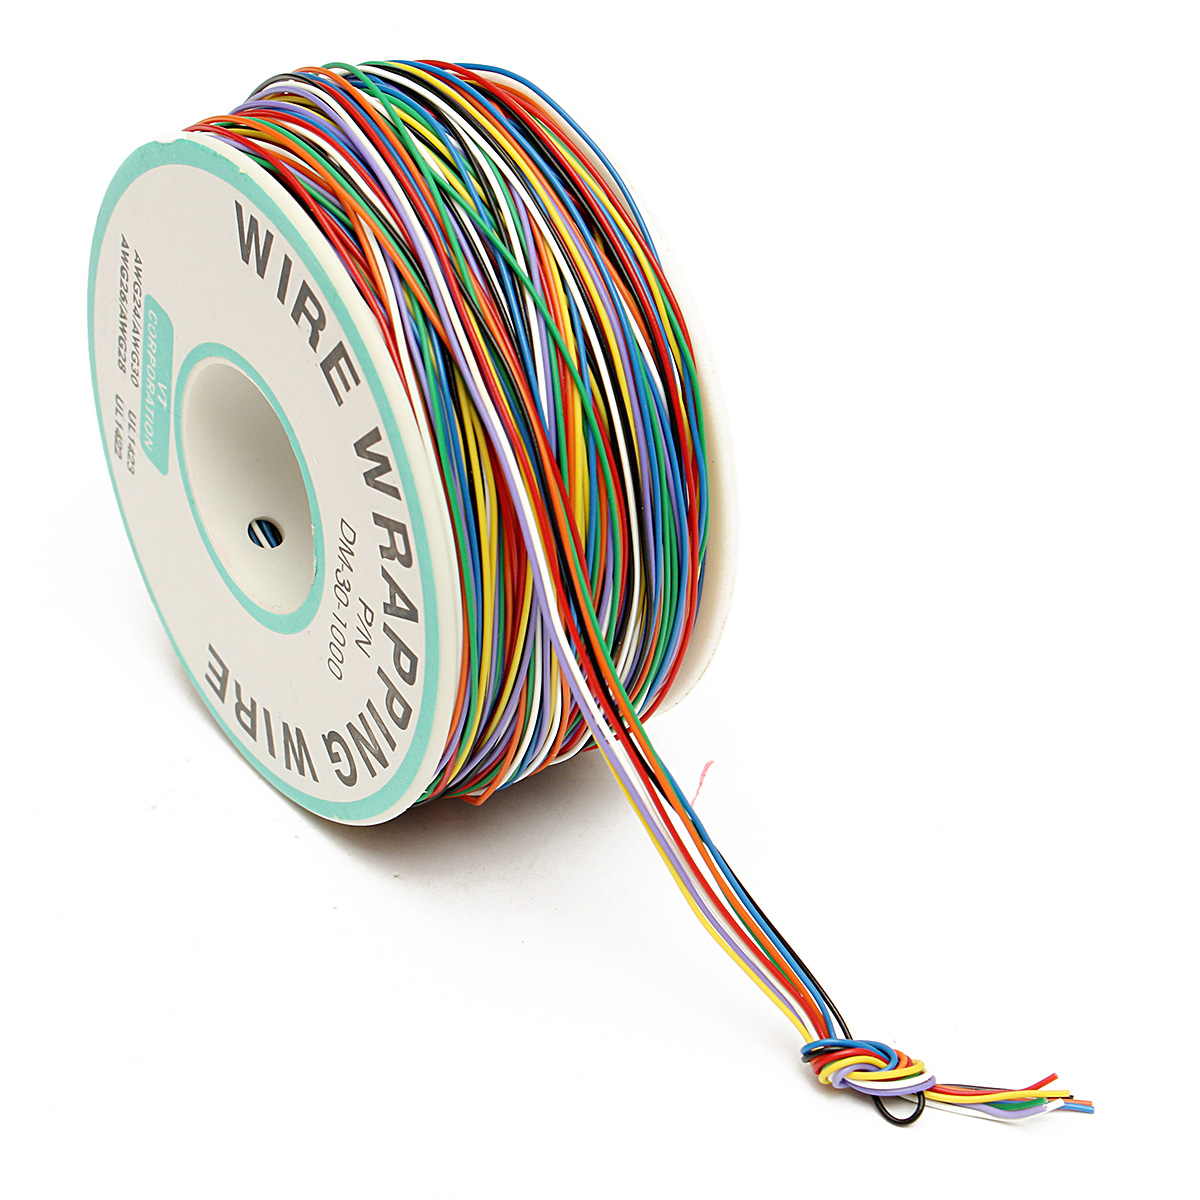 200M 30awg 8 color 8-wire hookup wire wrap spool 25M each color US Seller 